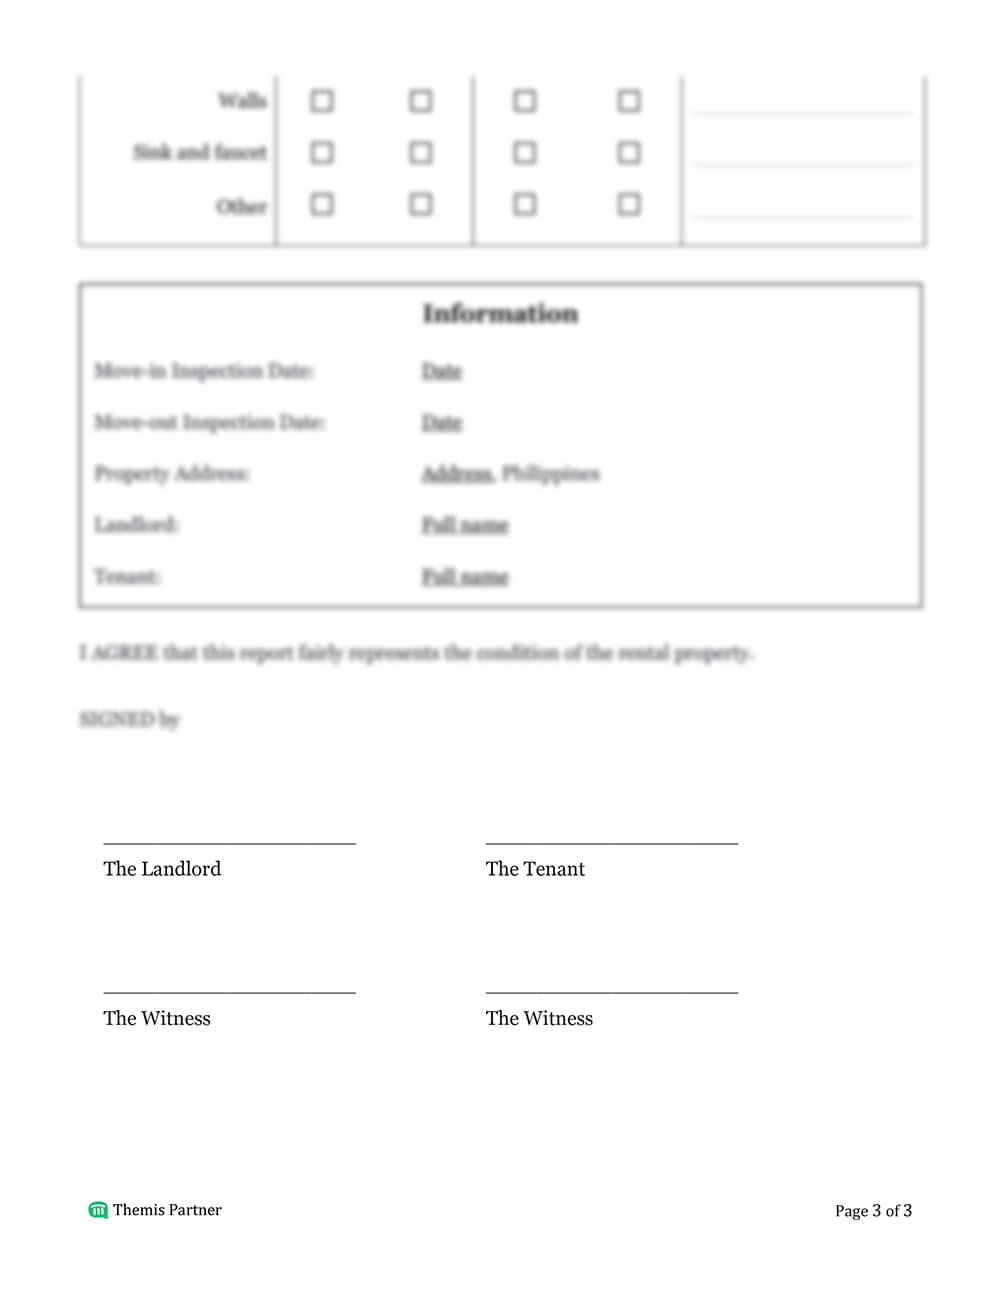 Rental inspection report template 3